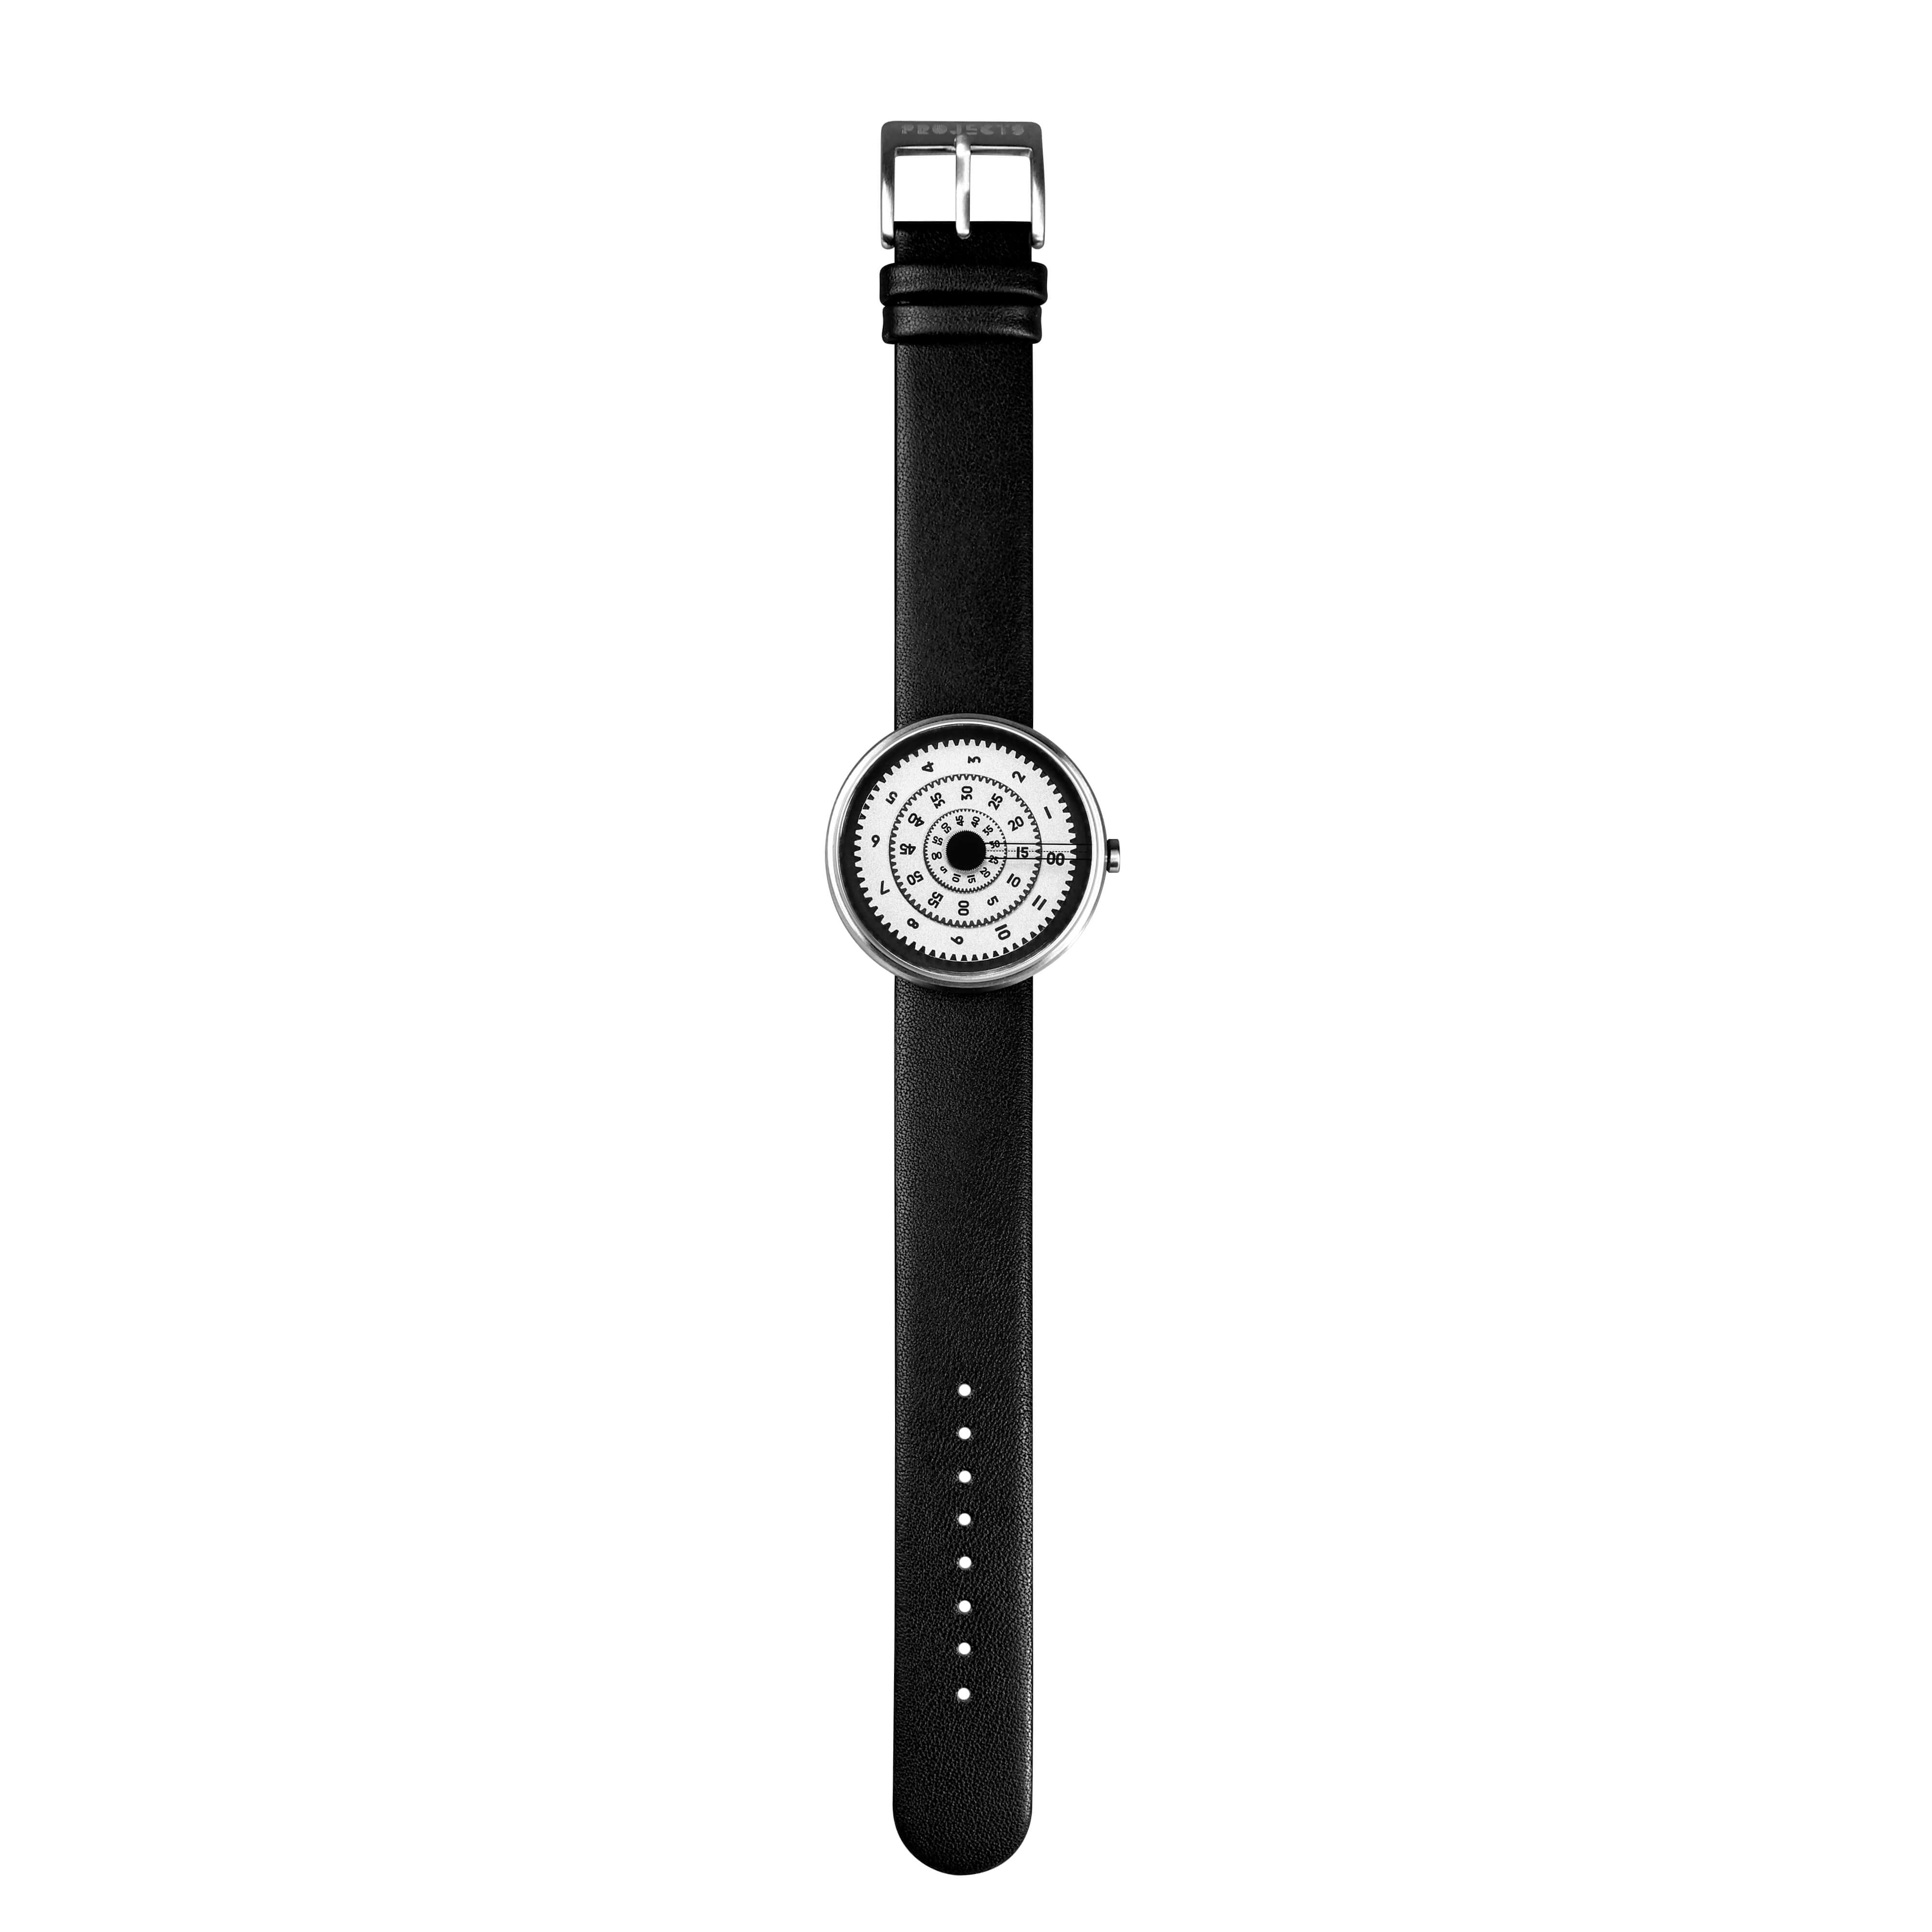 Swiss Time House - Watch Store. Buy Authentic and Genuine Watches and  Accessories at the best prices